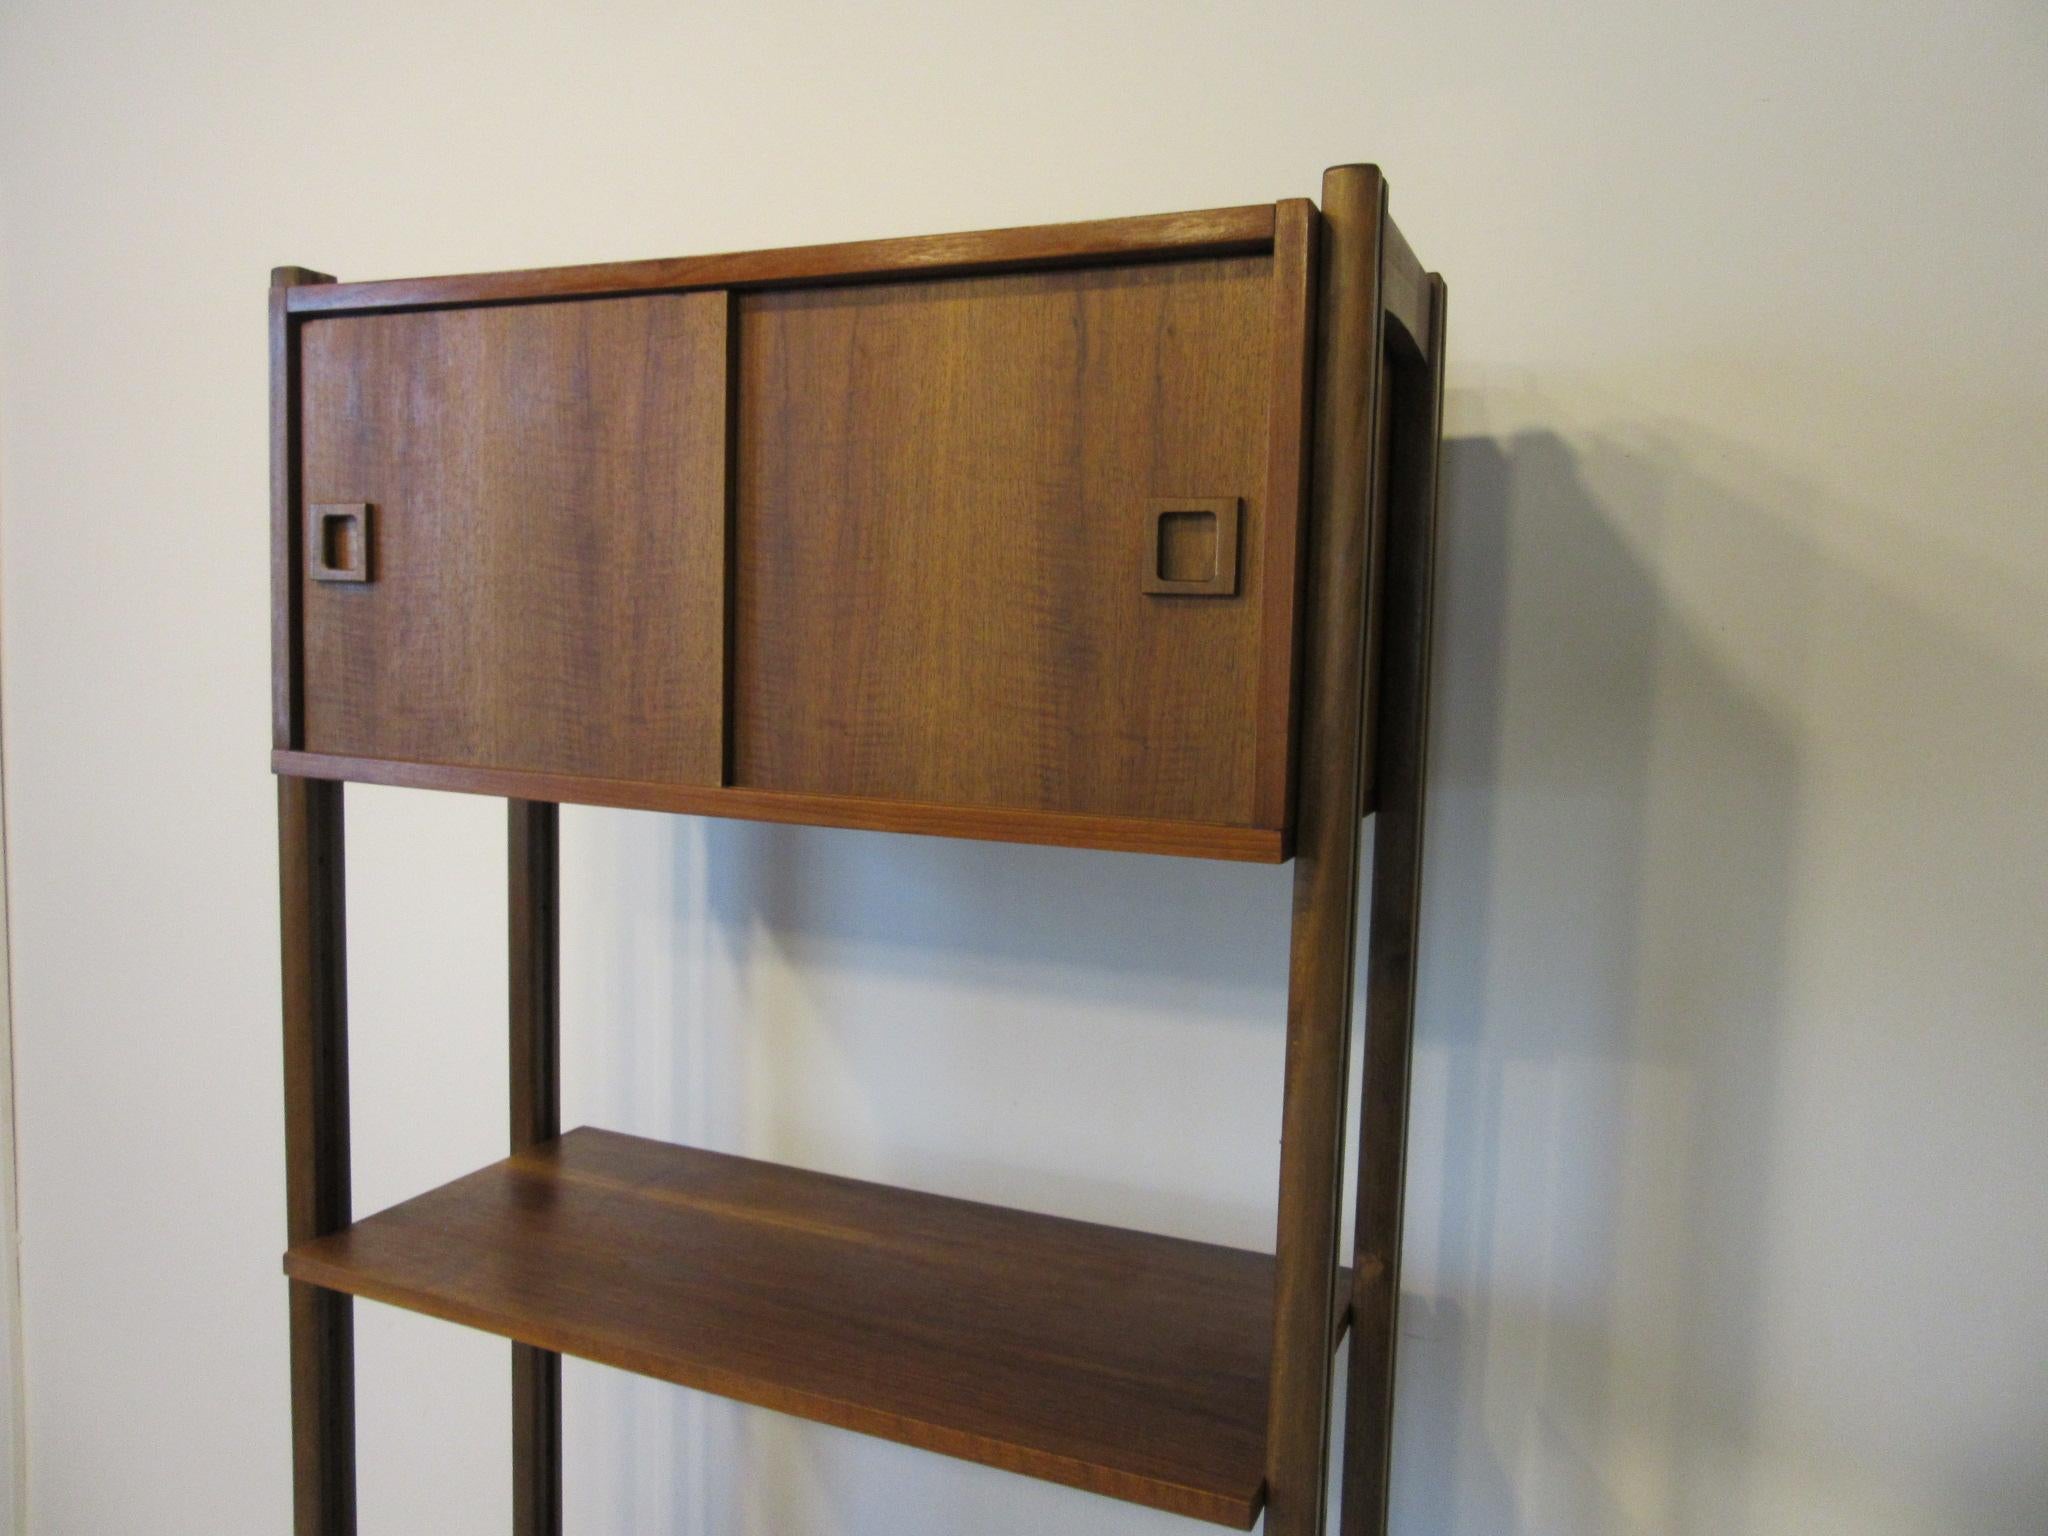 A walnut wall unit with upper two door storage cabinet, middle shelve for your stereo receiver and other equipment and lower area for the turntable and a record cabinet having five slots sits at the base. All the pieces are adjustable so you can